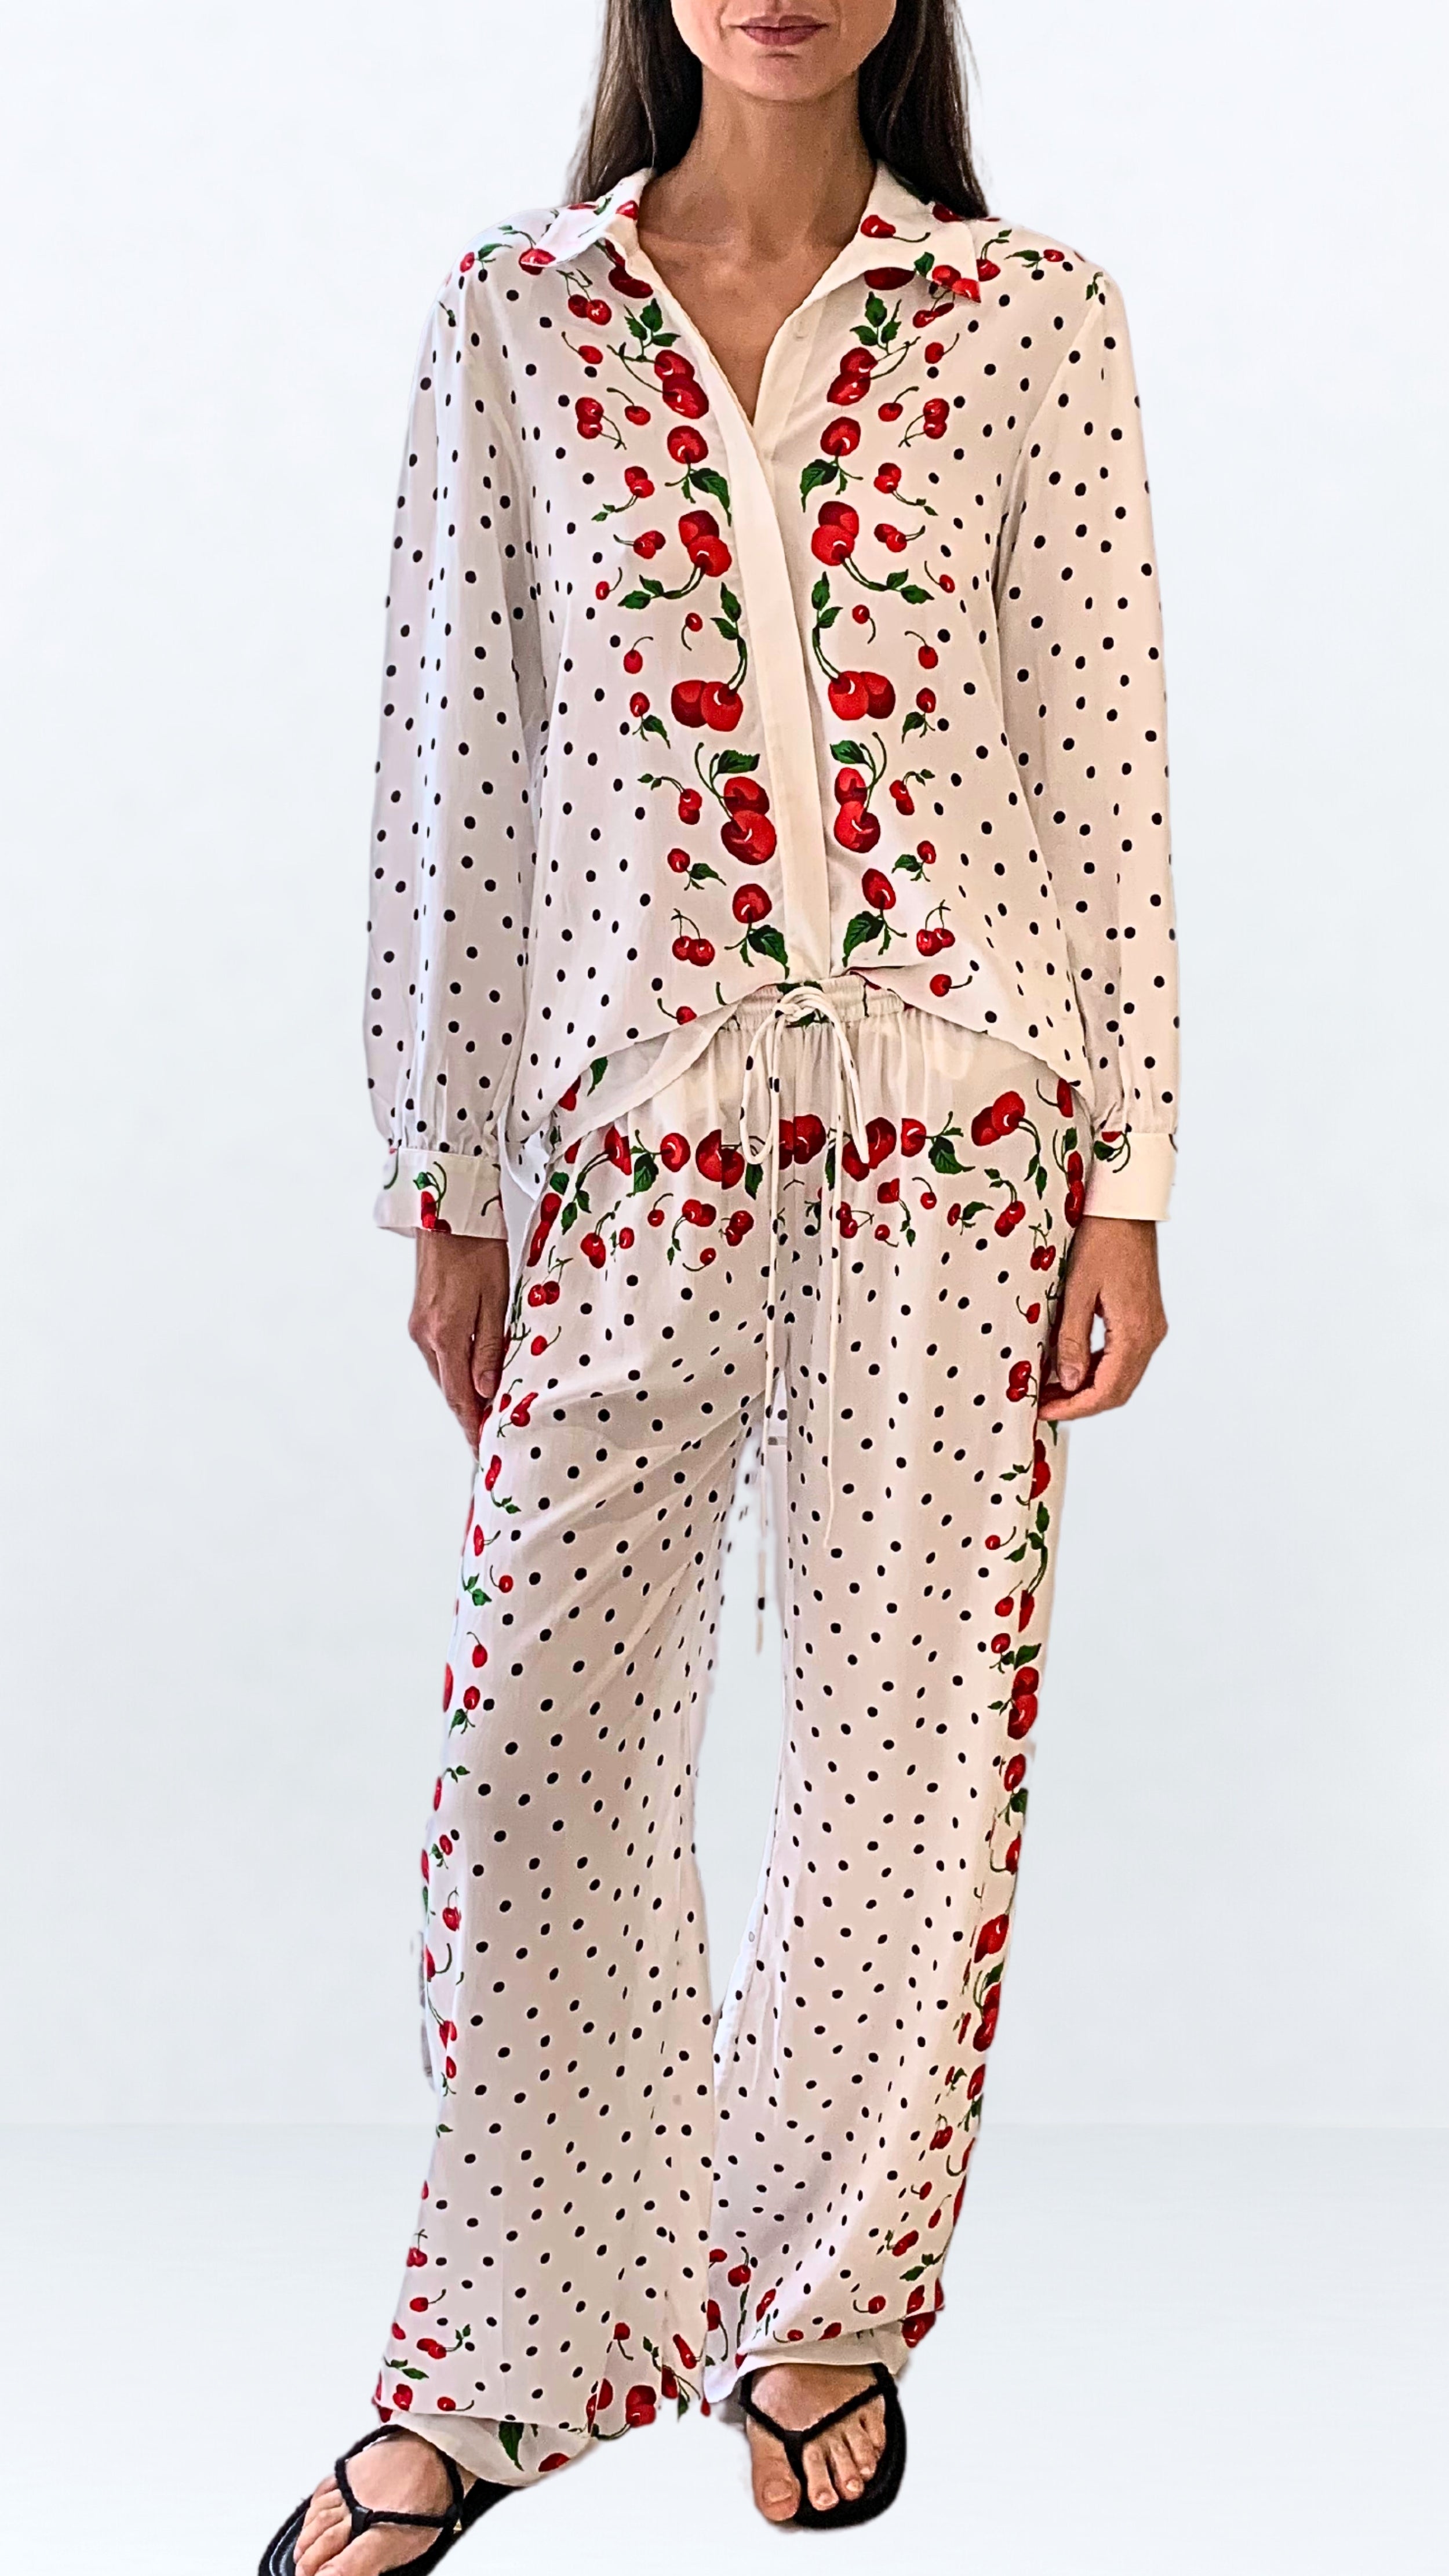 Leslie Amon Oversized Shirt in White Cherry. Oversized blouse in white with red cherry pattern. With button closures up the front, buttoned cuffs and collar. Photo shown on model facing front.